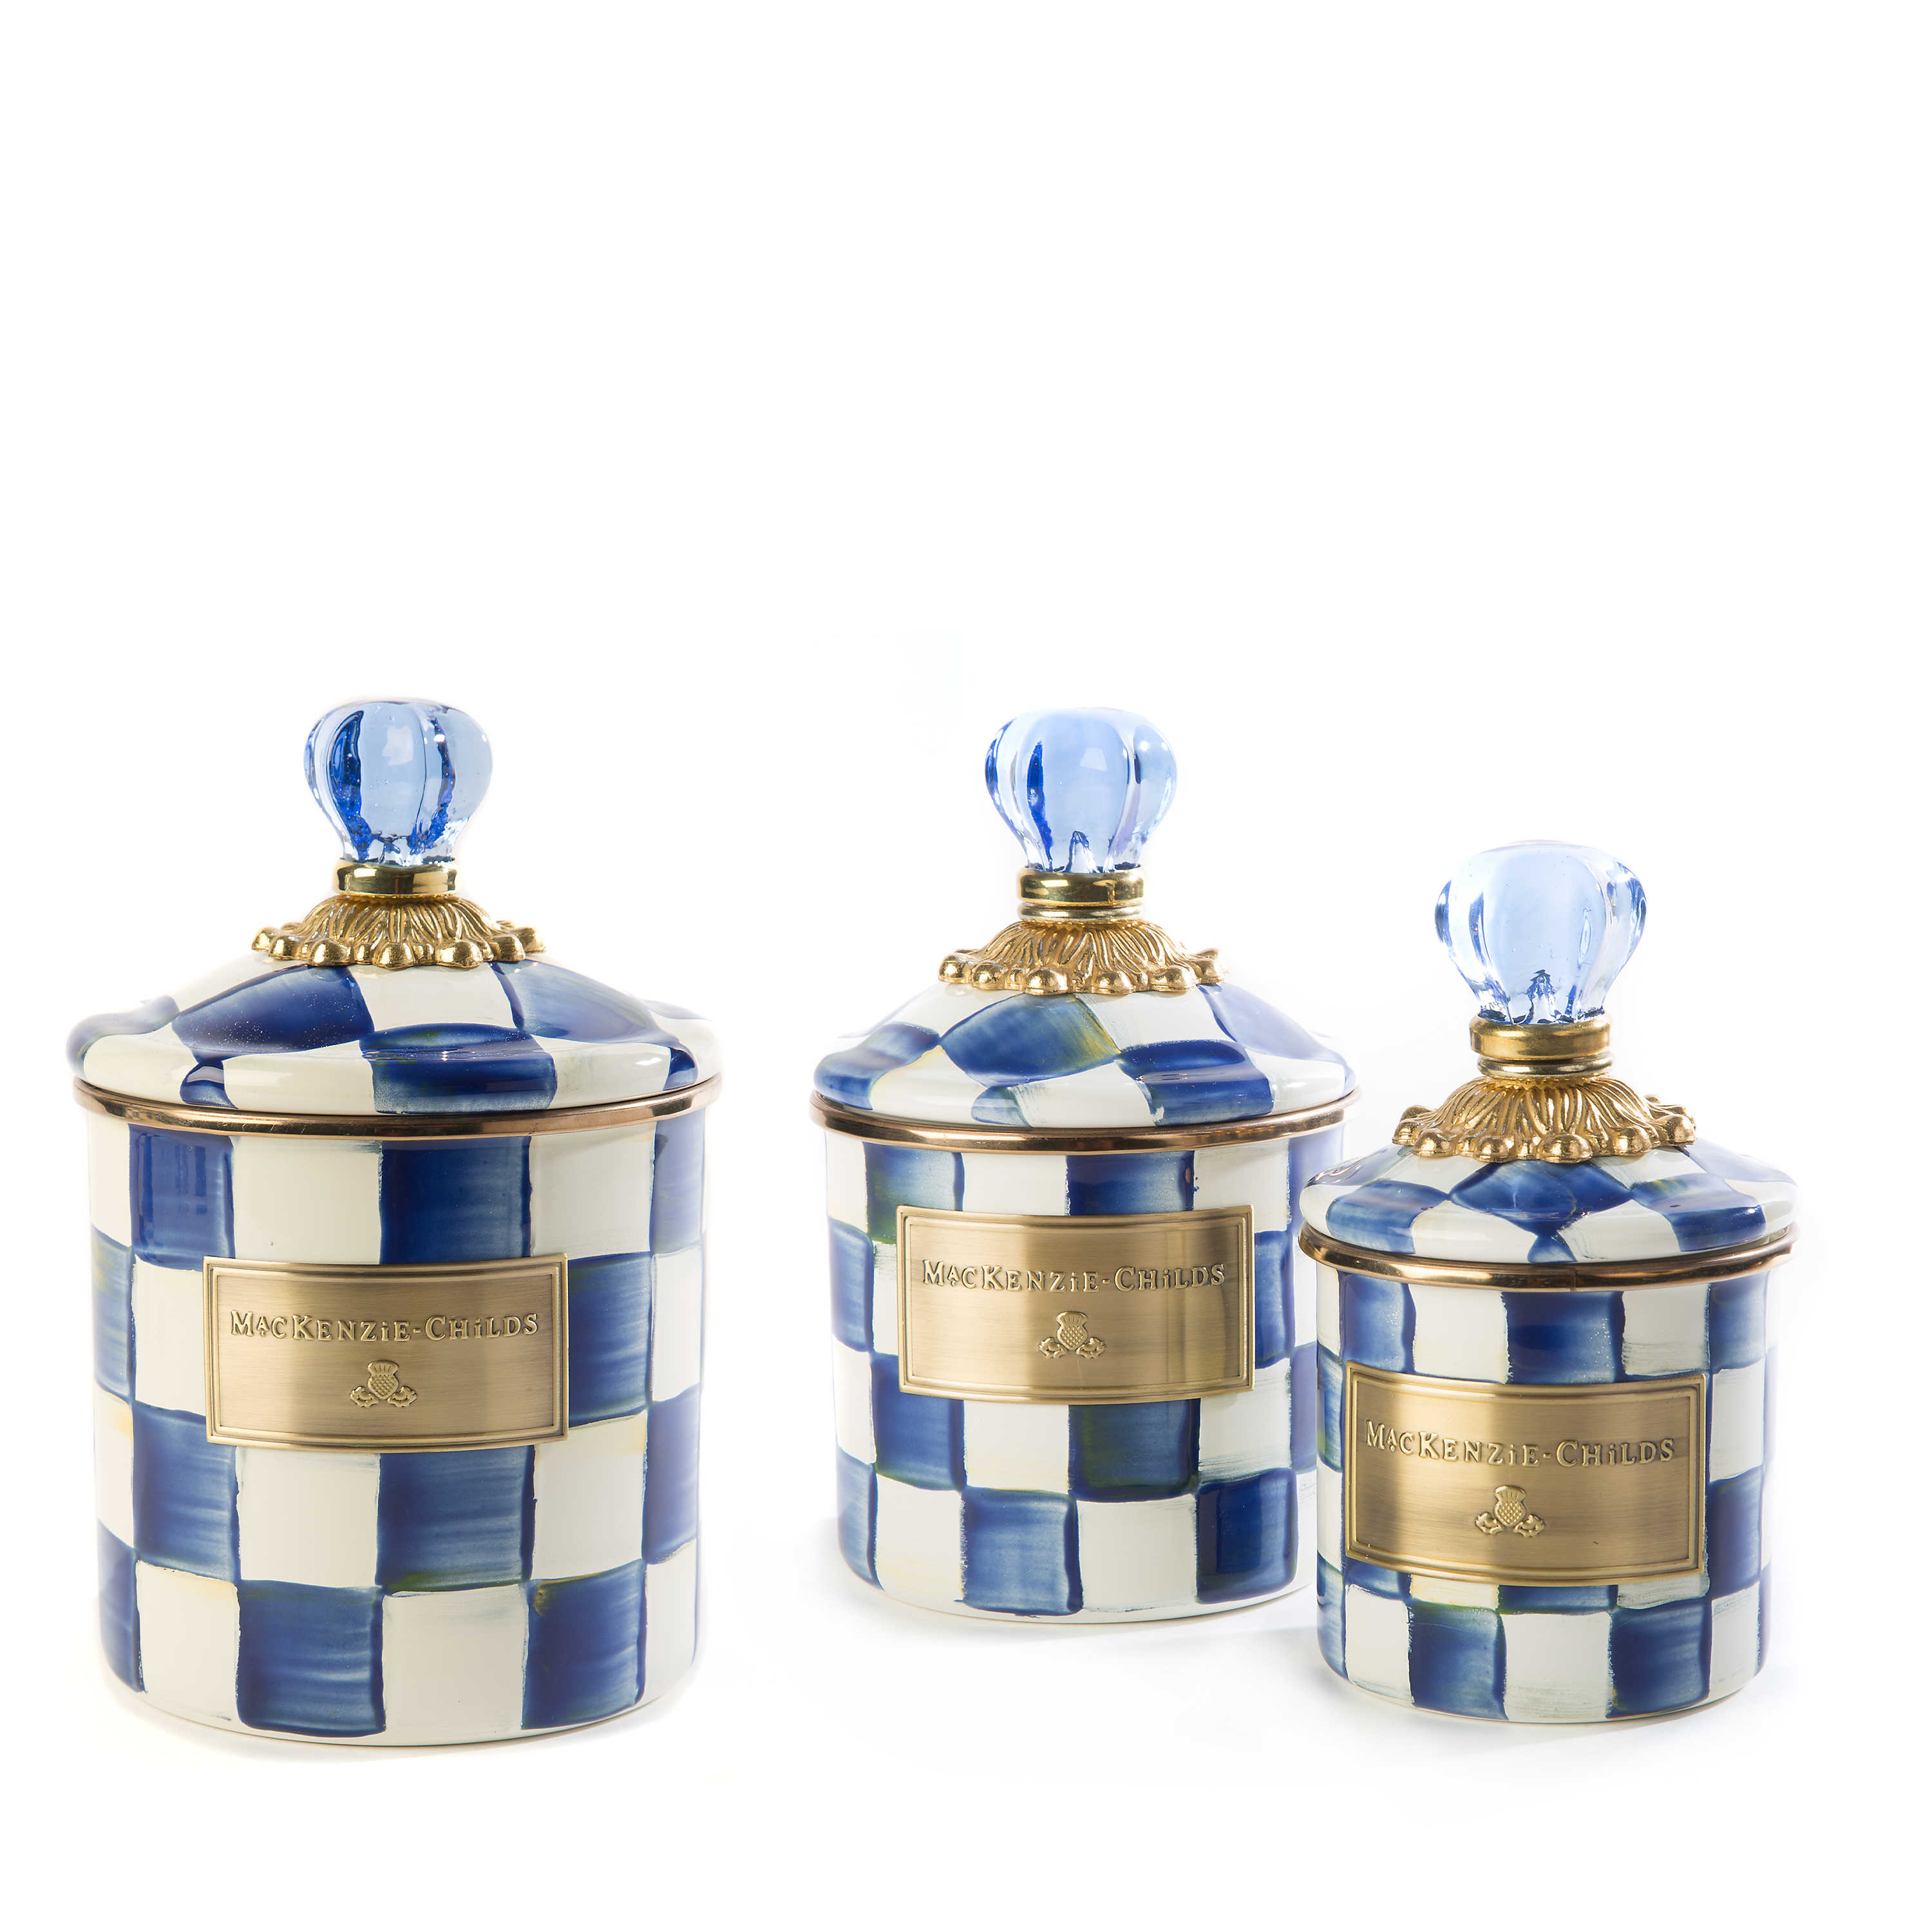 Royal Check Little Canisters, Set of 3 mackenzie-childs Panama 0